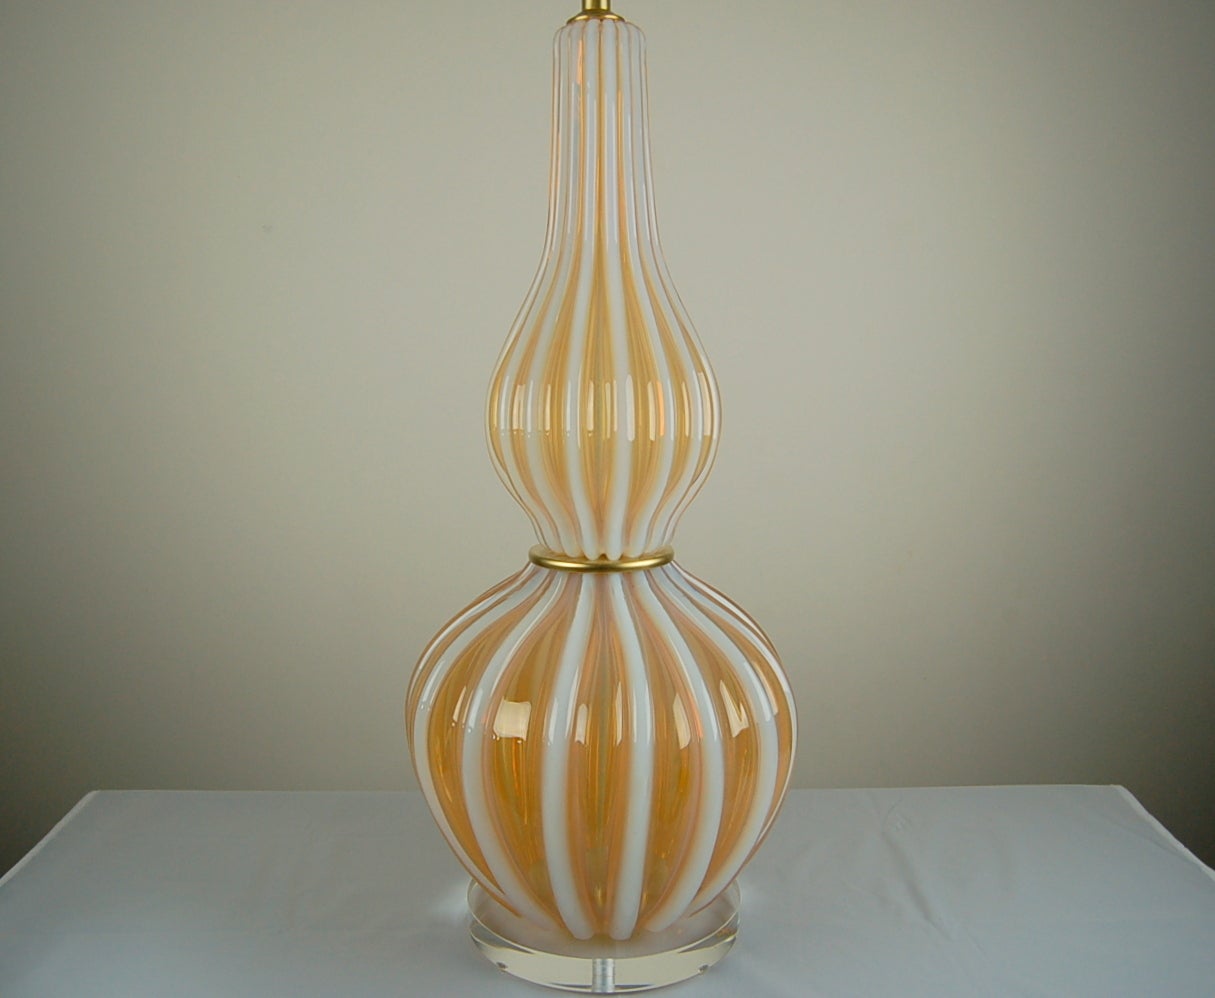 Hollywood Regency Imposing Vintage Murano Lamp in Peaches and Cream